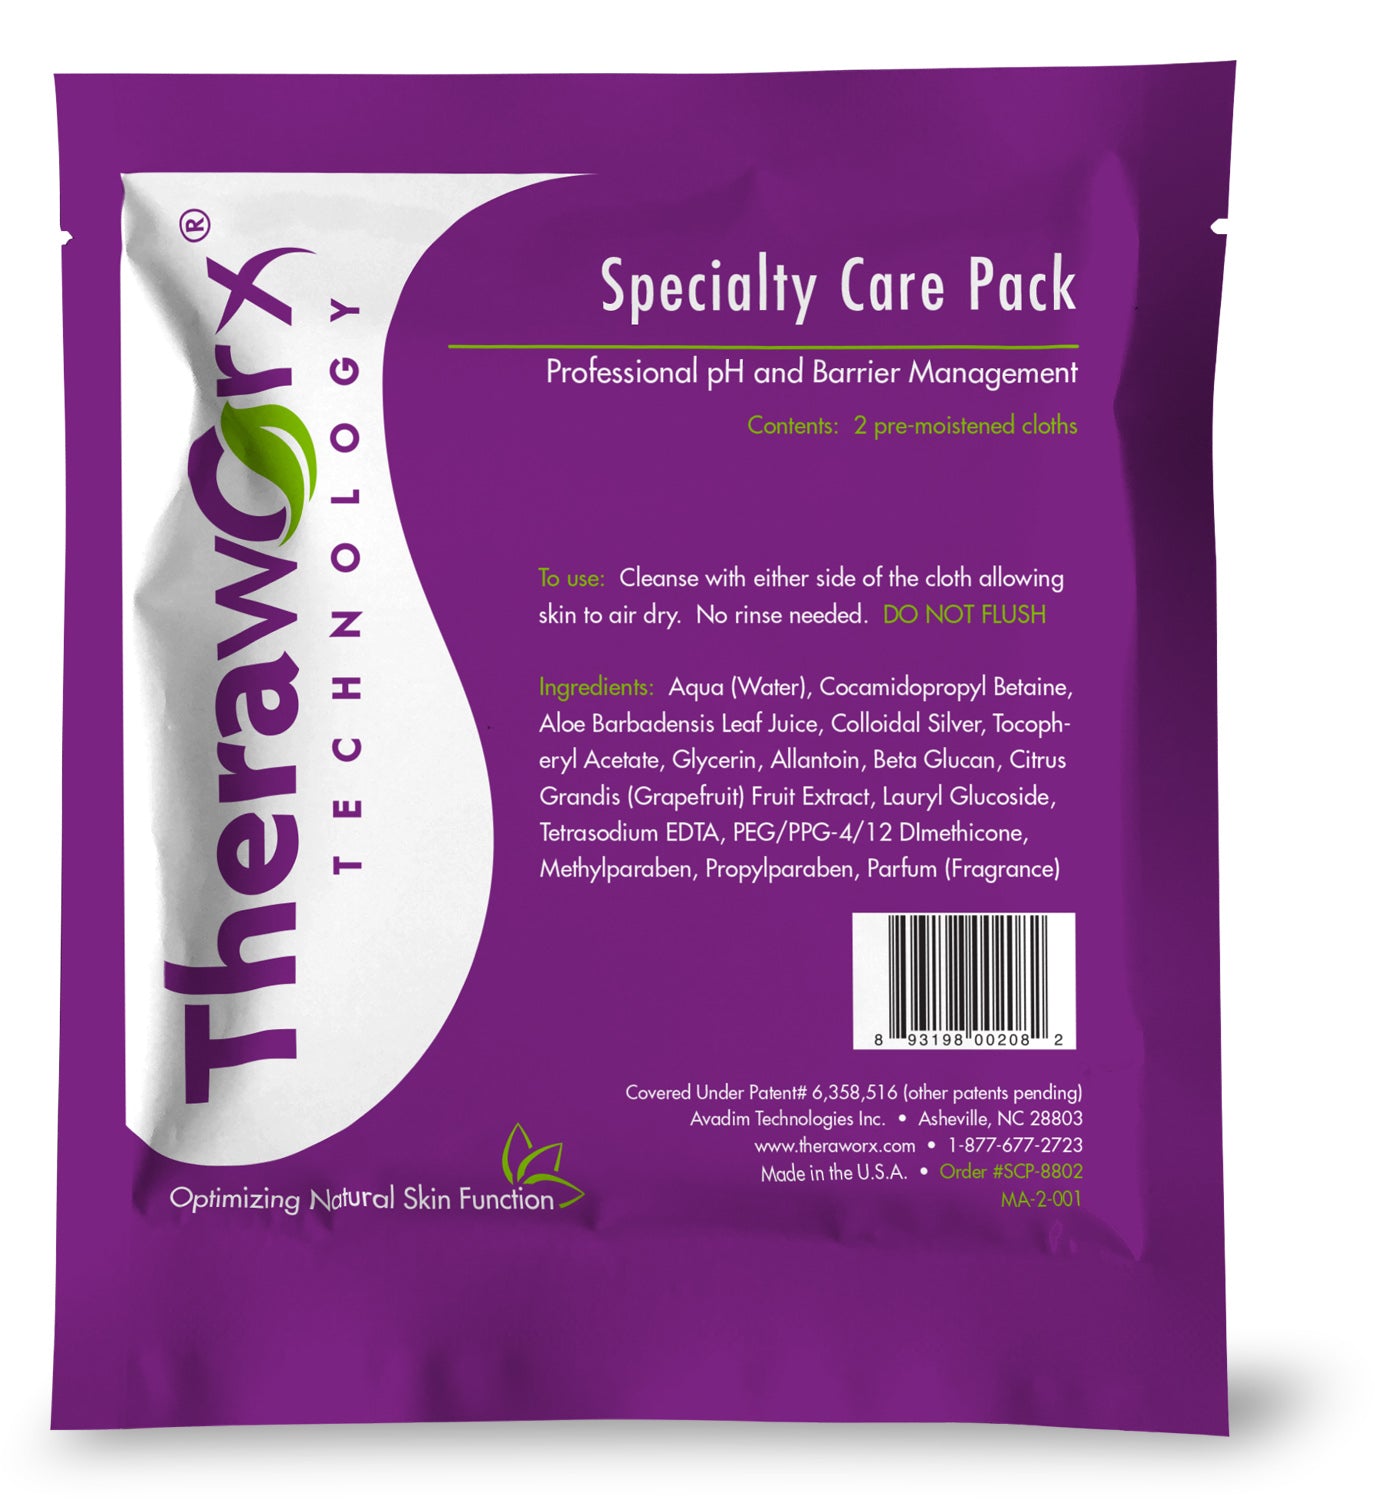 Theraworx Specialty Care Cloths AM-82-SCP-8802FF